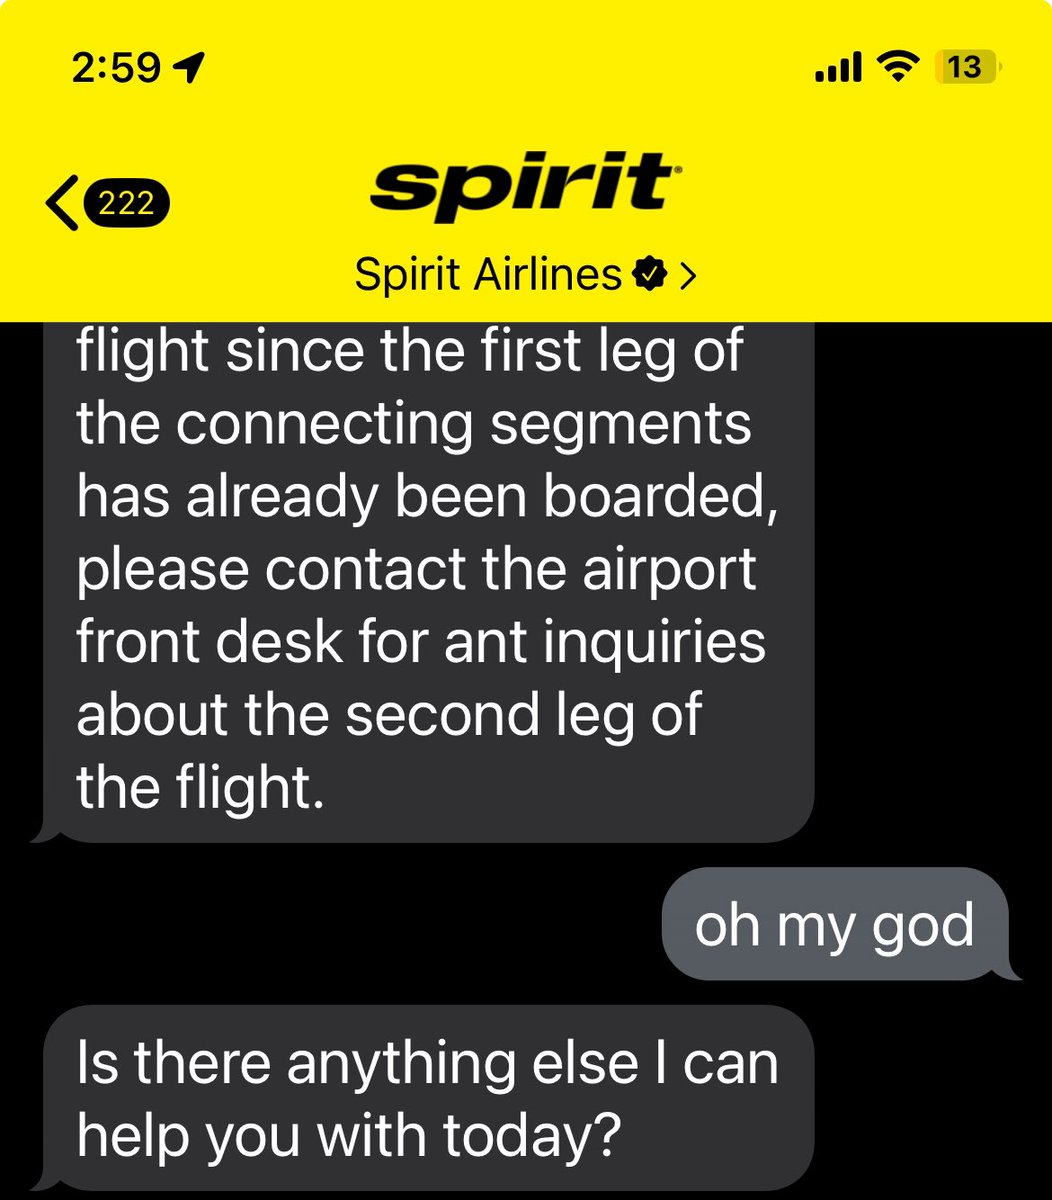 @SpiritAirlines you did all the scripted responses already :(